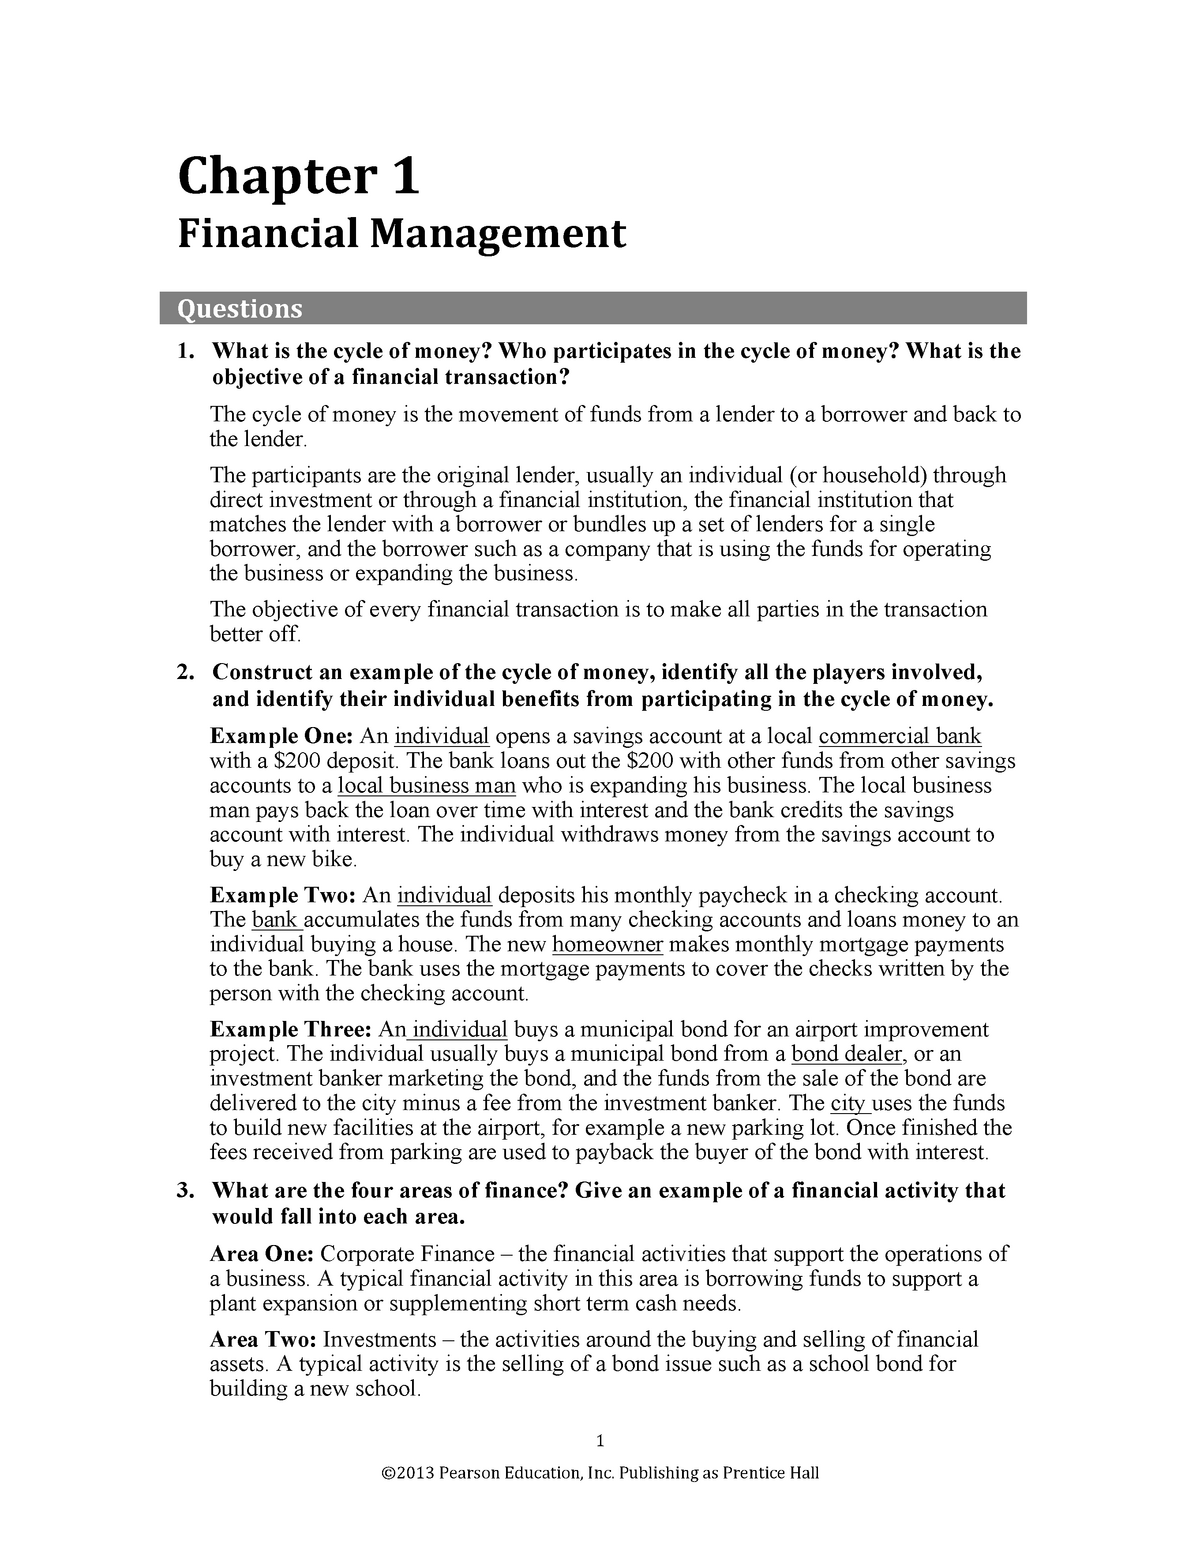 phd thesis in financial management pdf